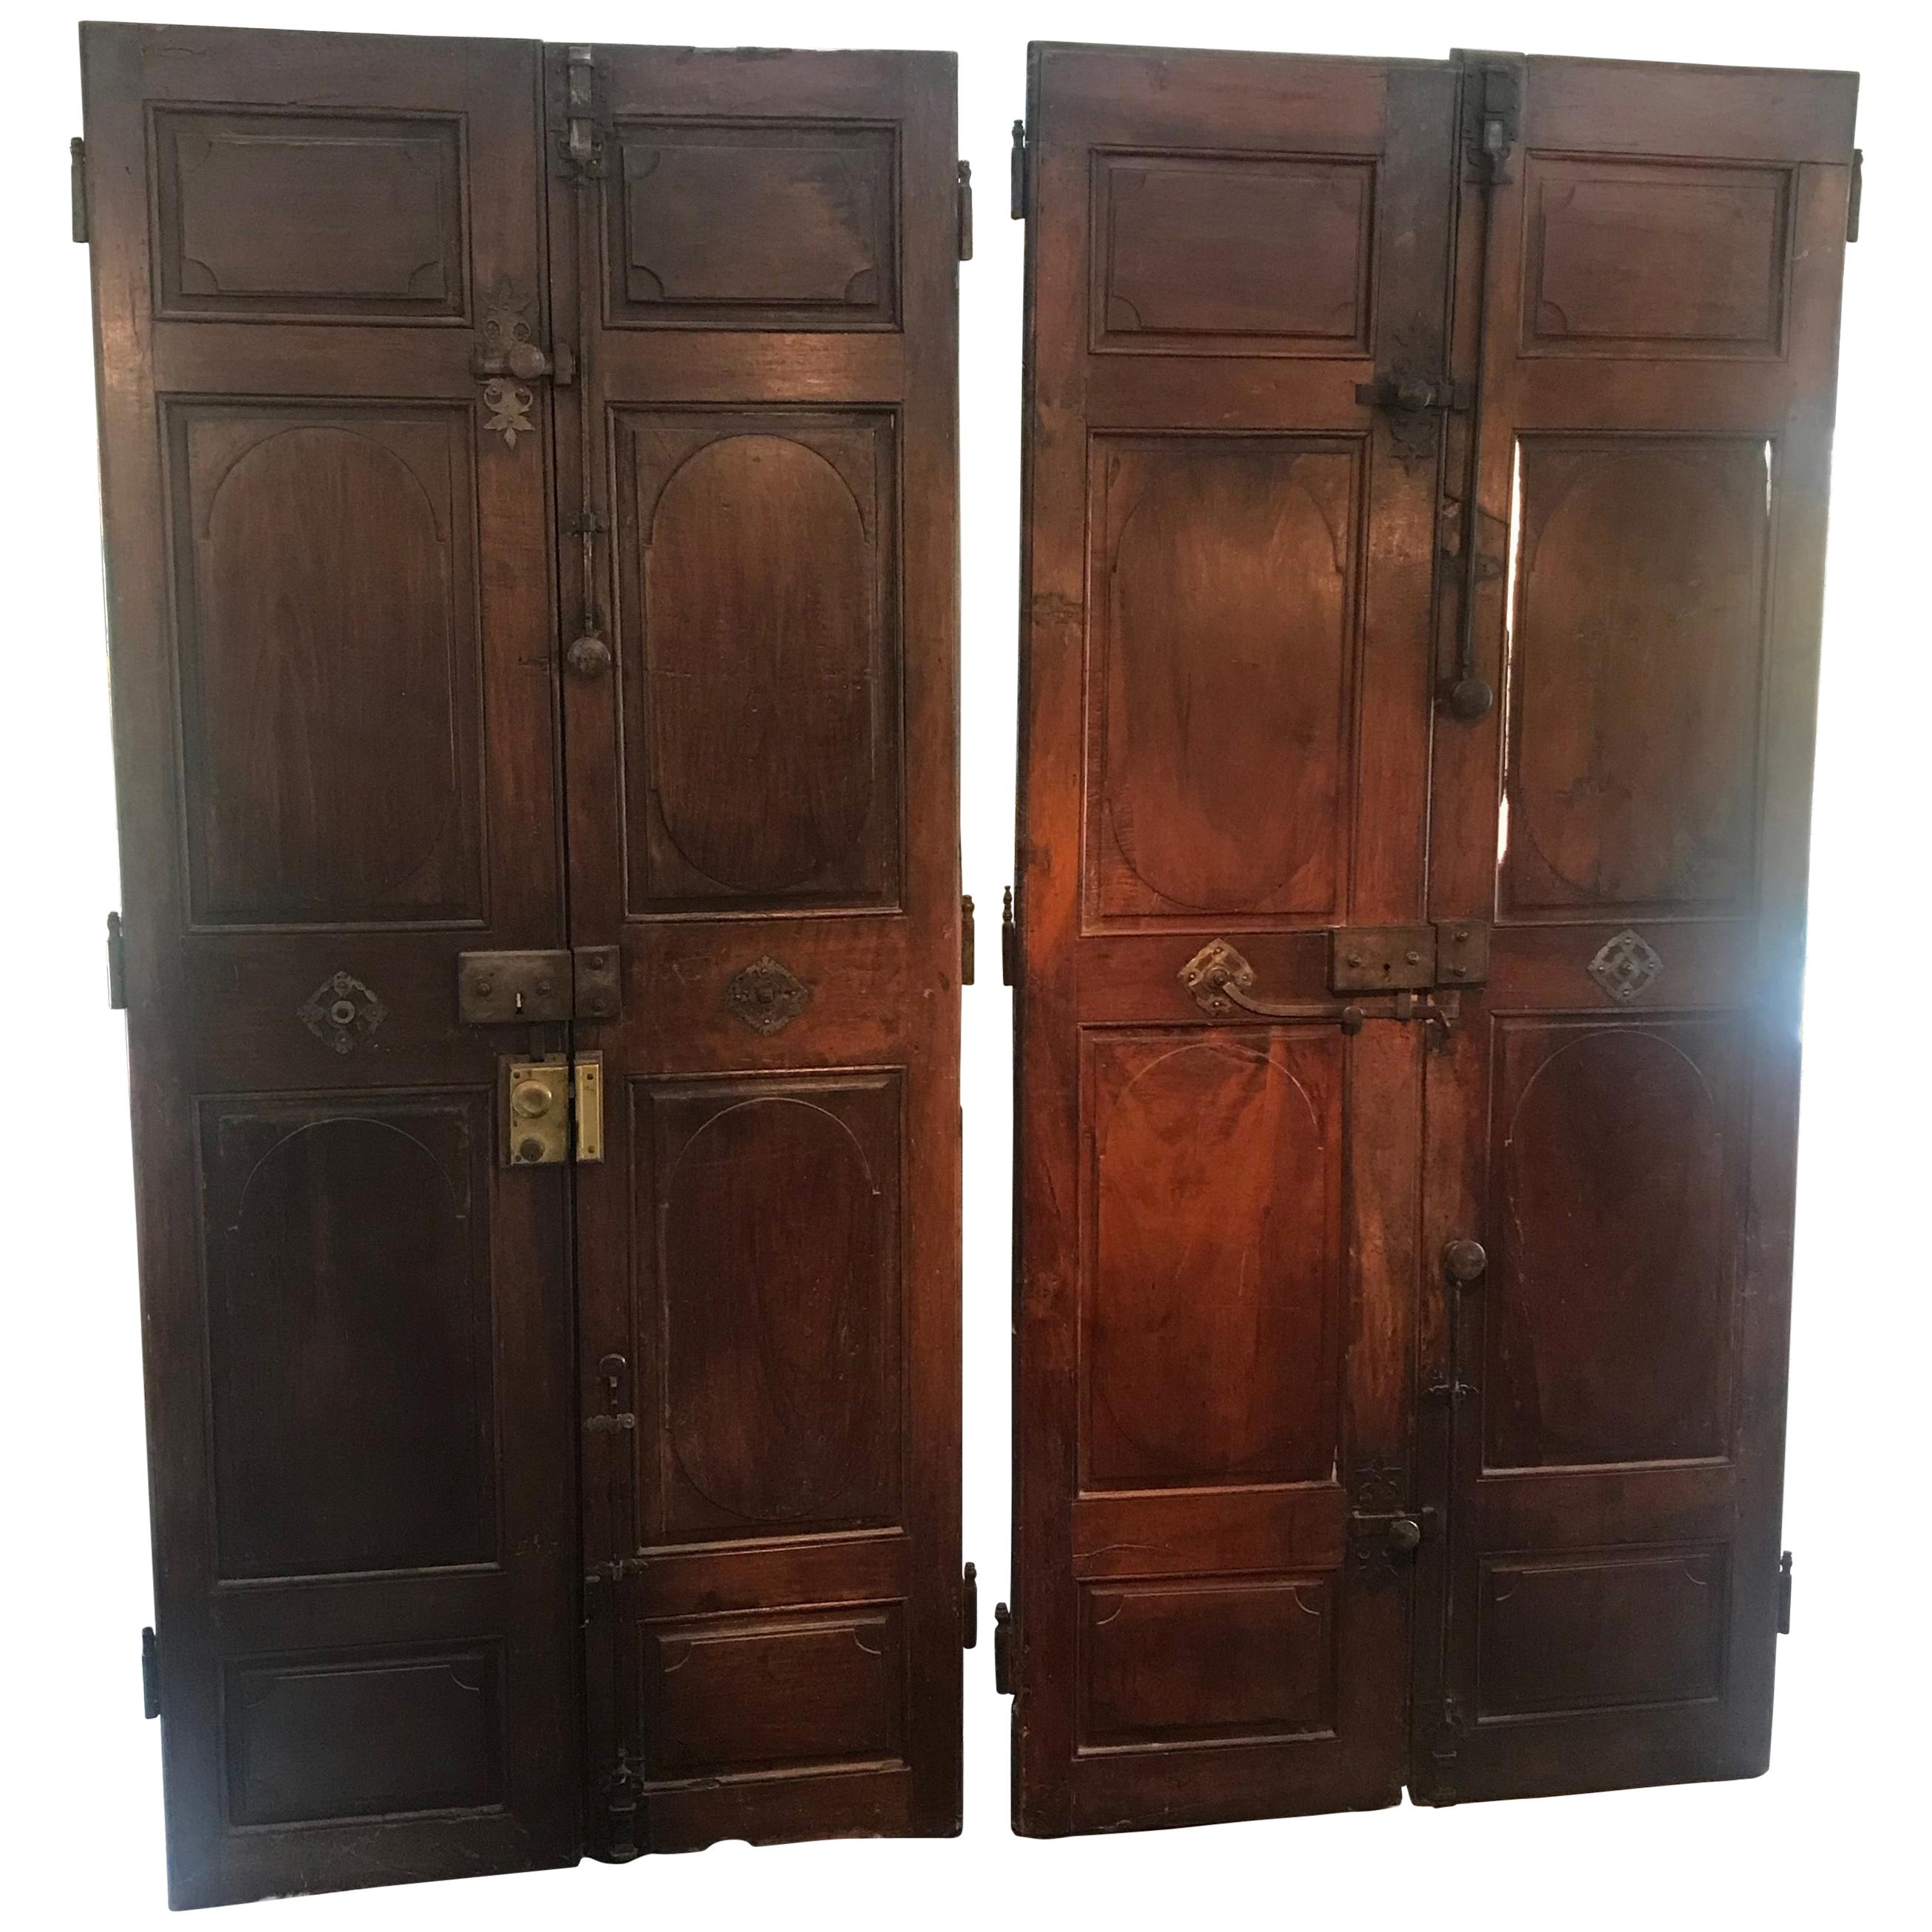 Two Pairs of Very Large Architectural Palatial French Walnut Doors